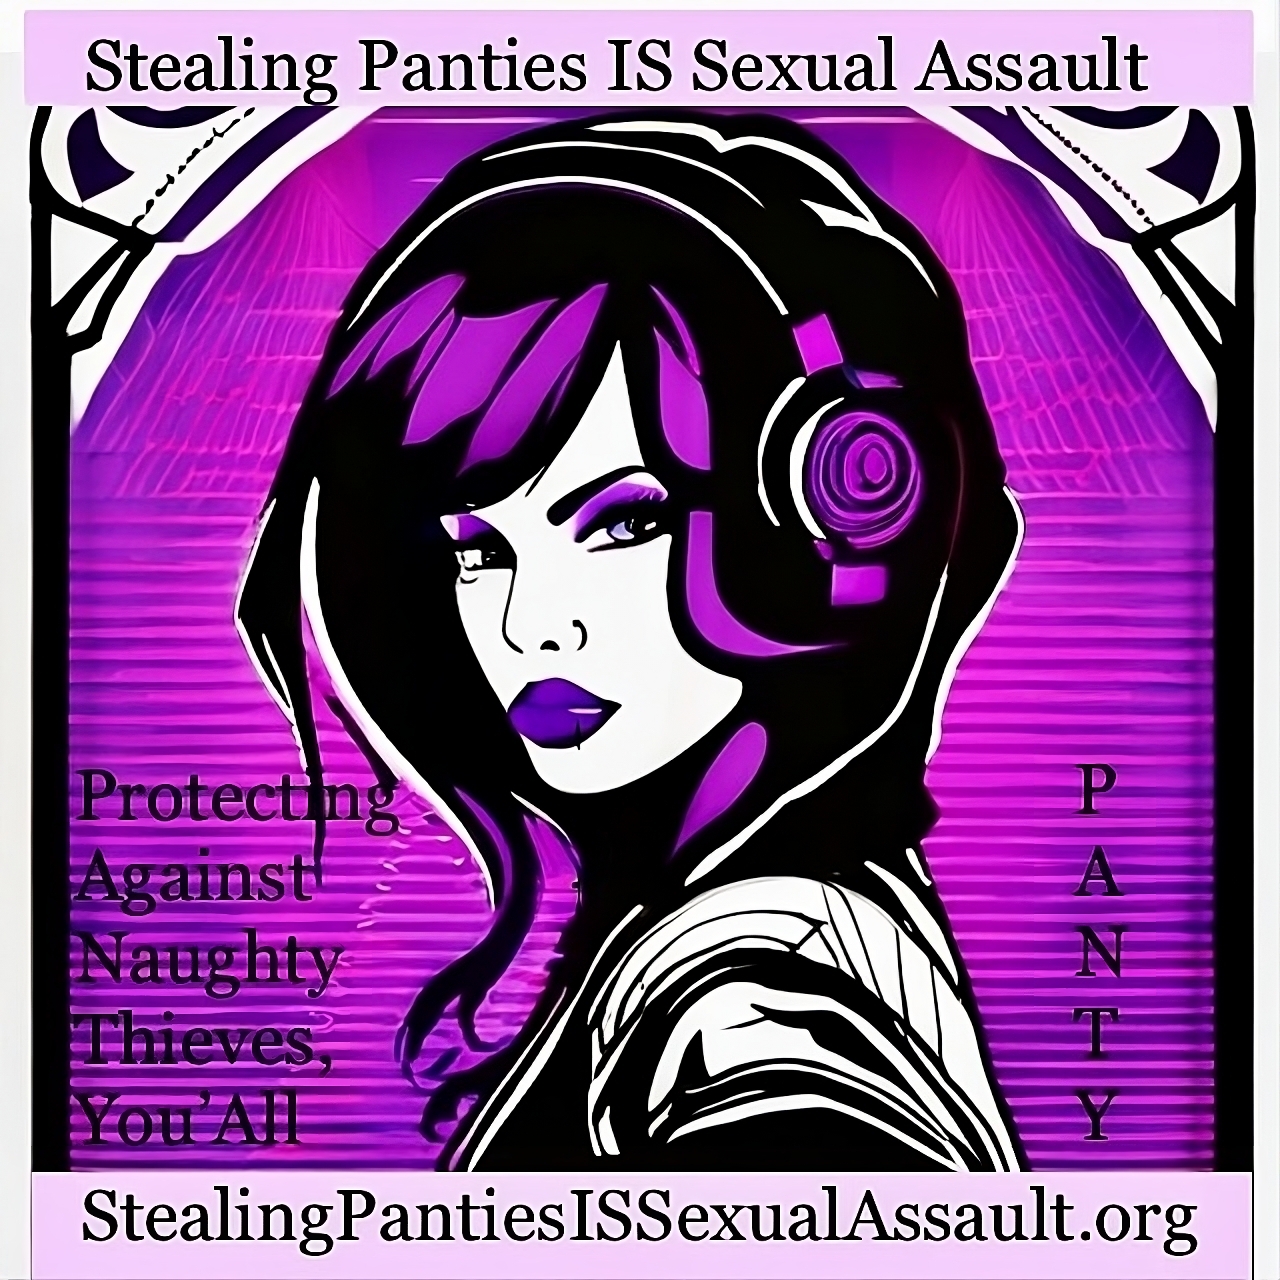 The Jade Ann Byrne Nonprofit Foundation, Stealing Panties IS Sexual Assault dot ORG